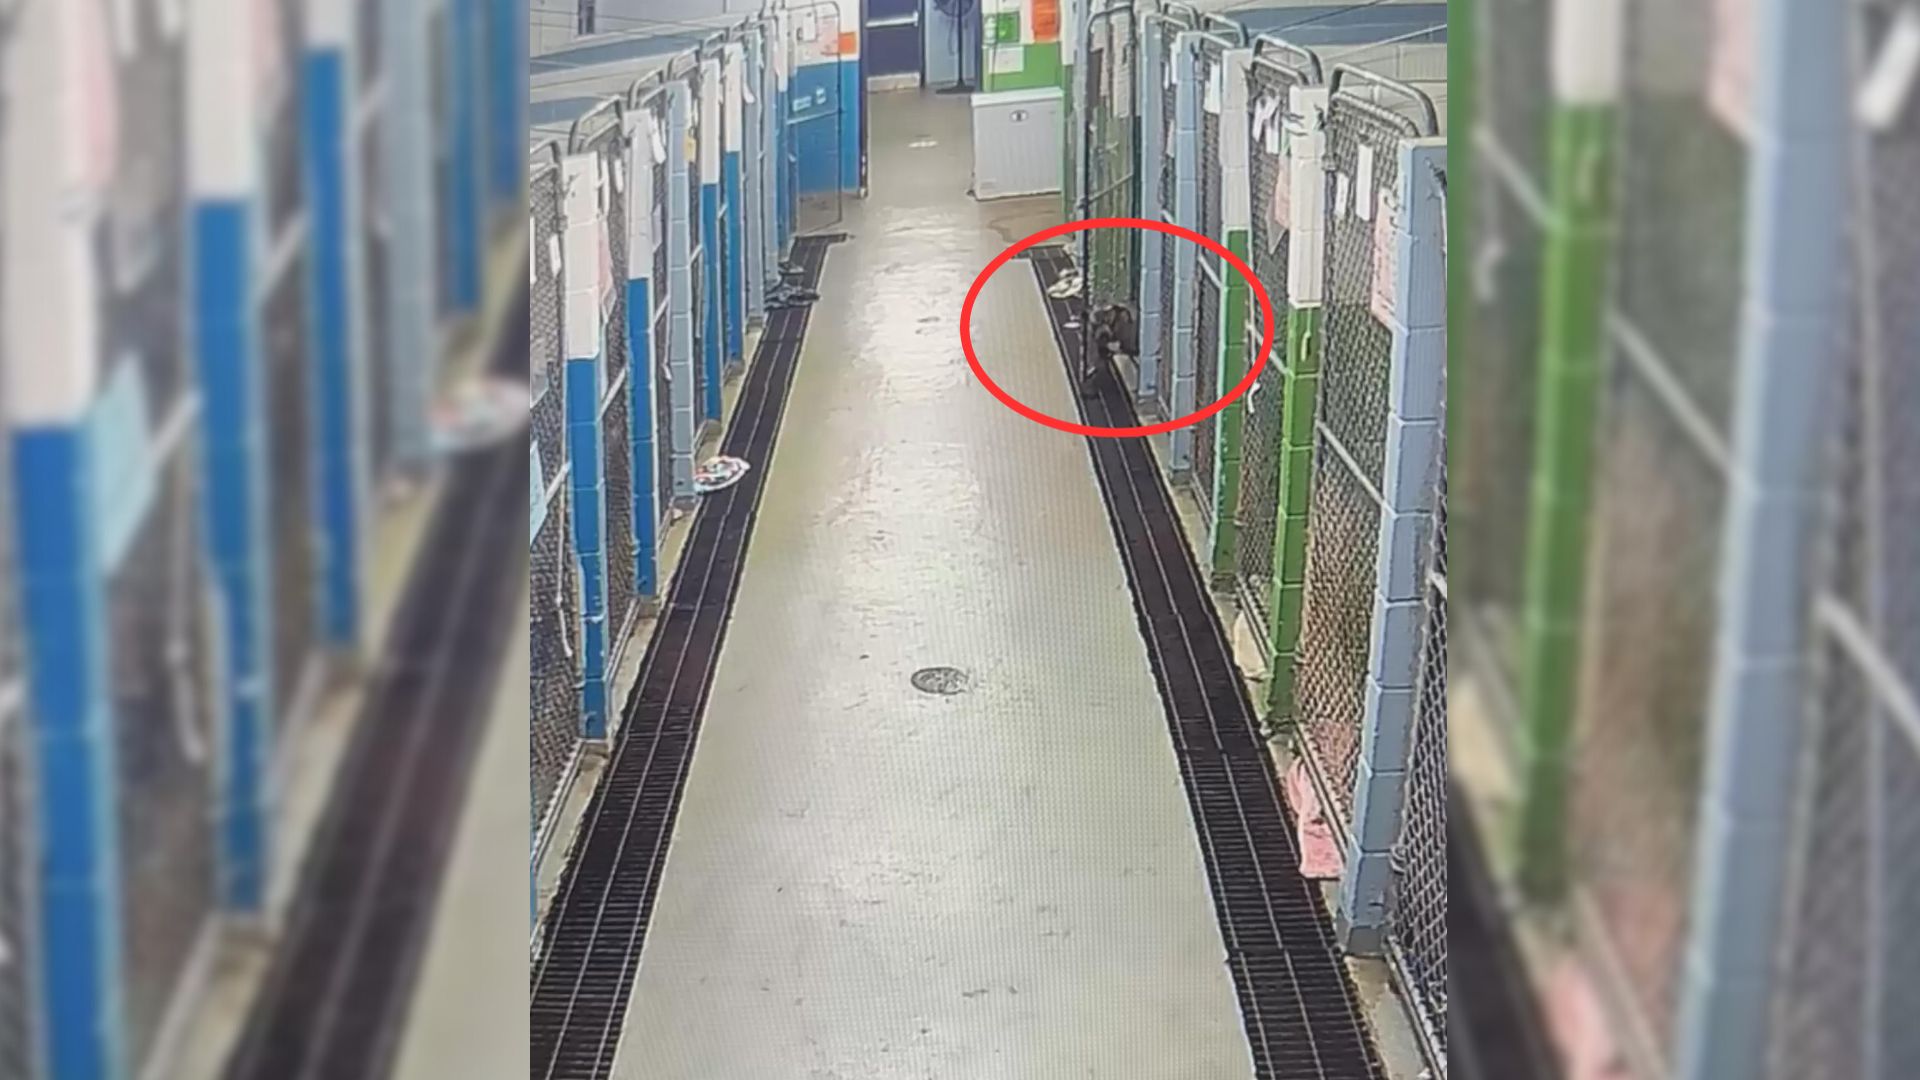 An Accidental “Jailbreak” Caught On Security Camera Led This Dog To A Time Of Her Life